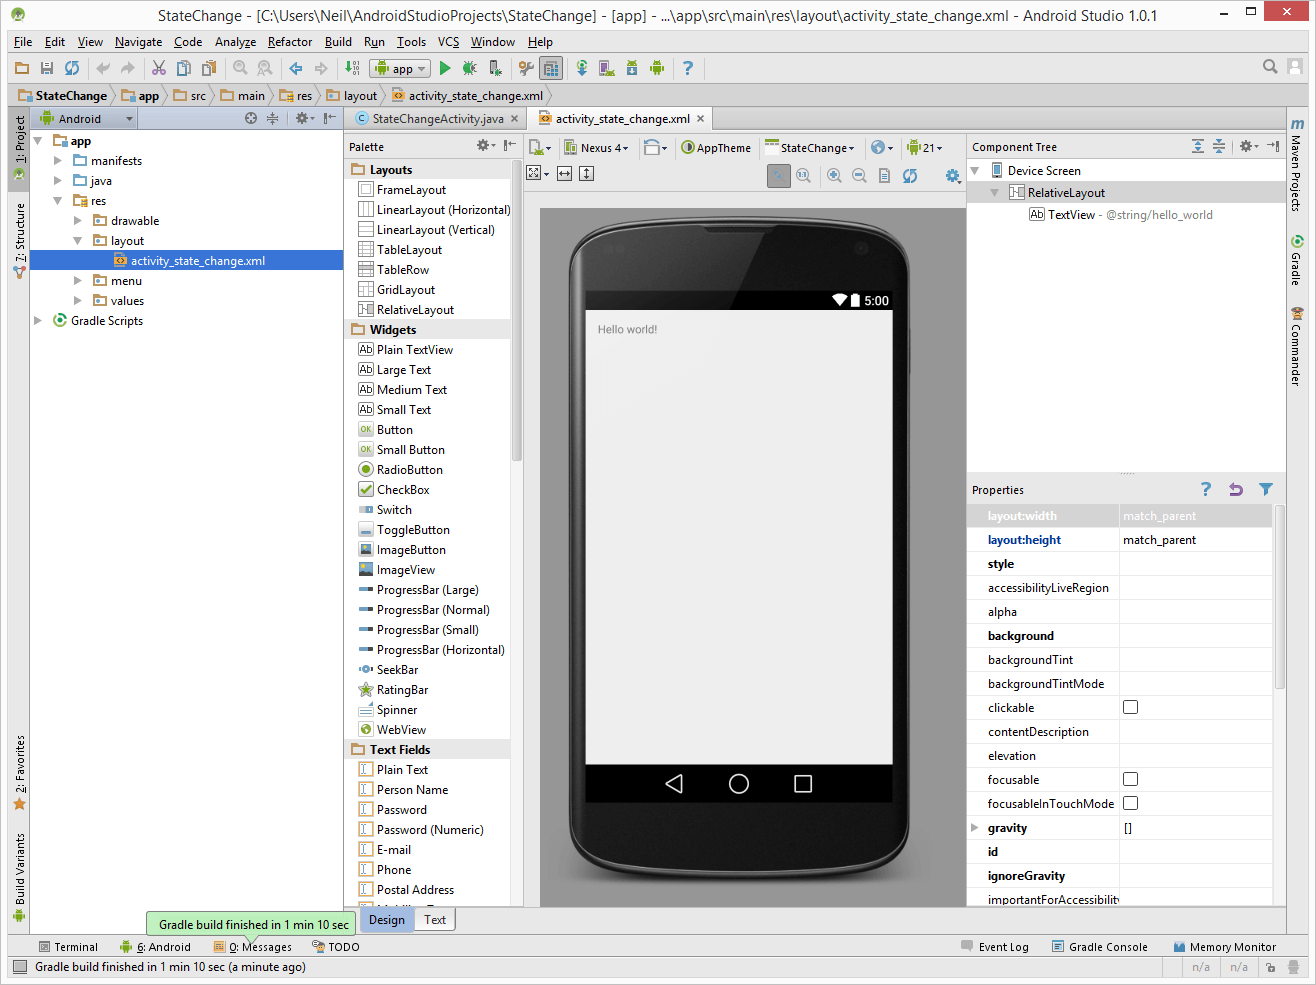 The layout file for an Android Activity loaded into Android Studio